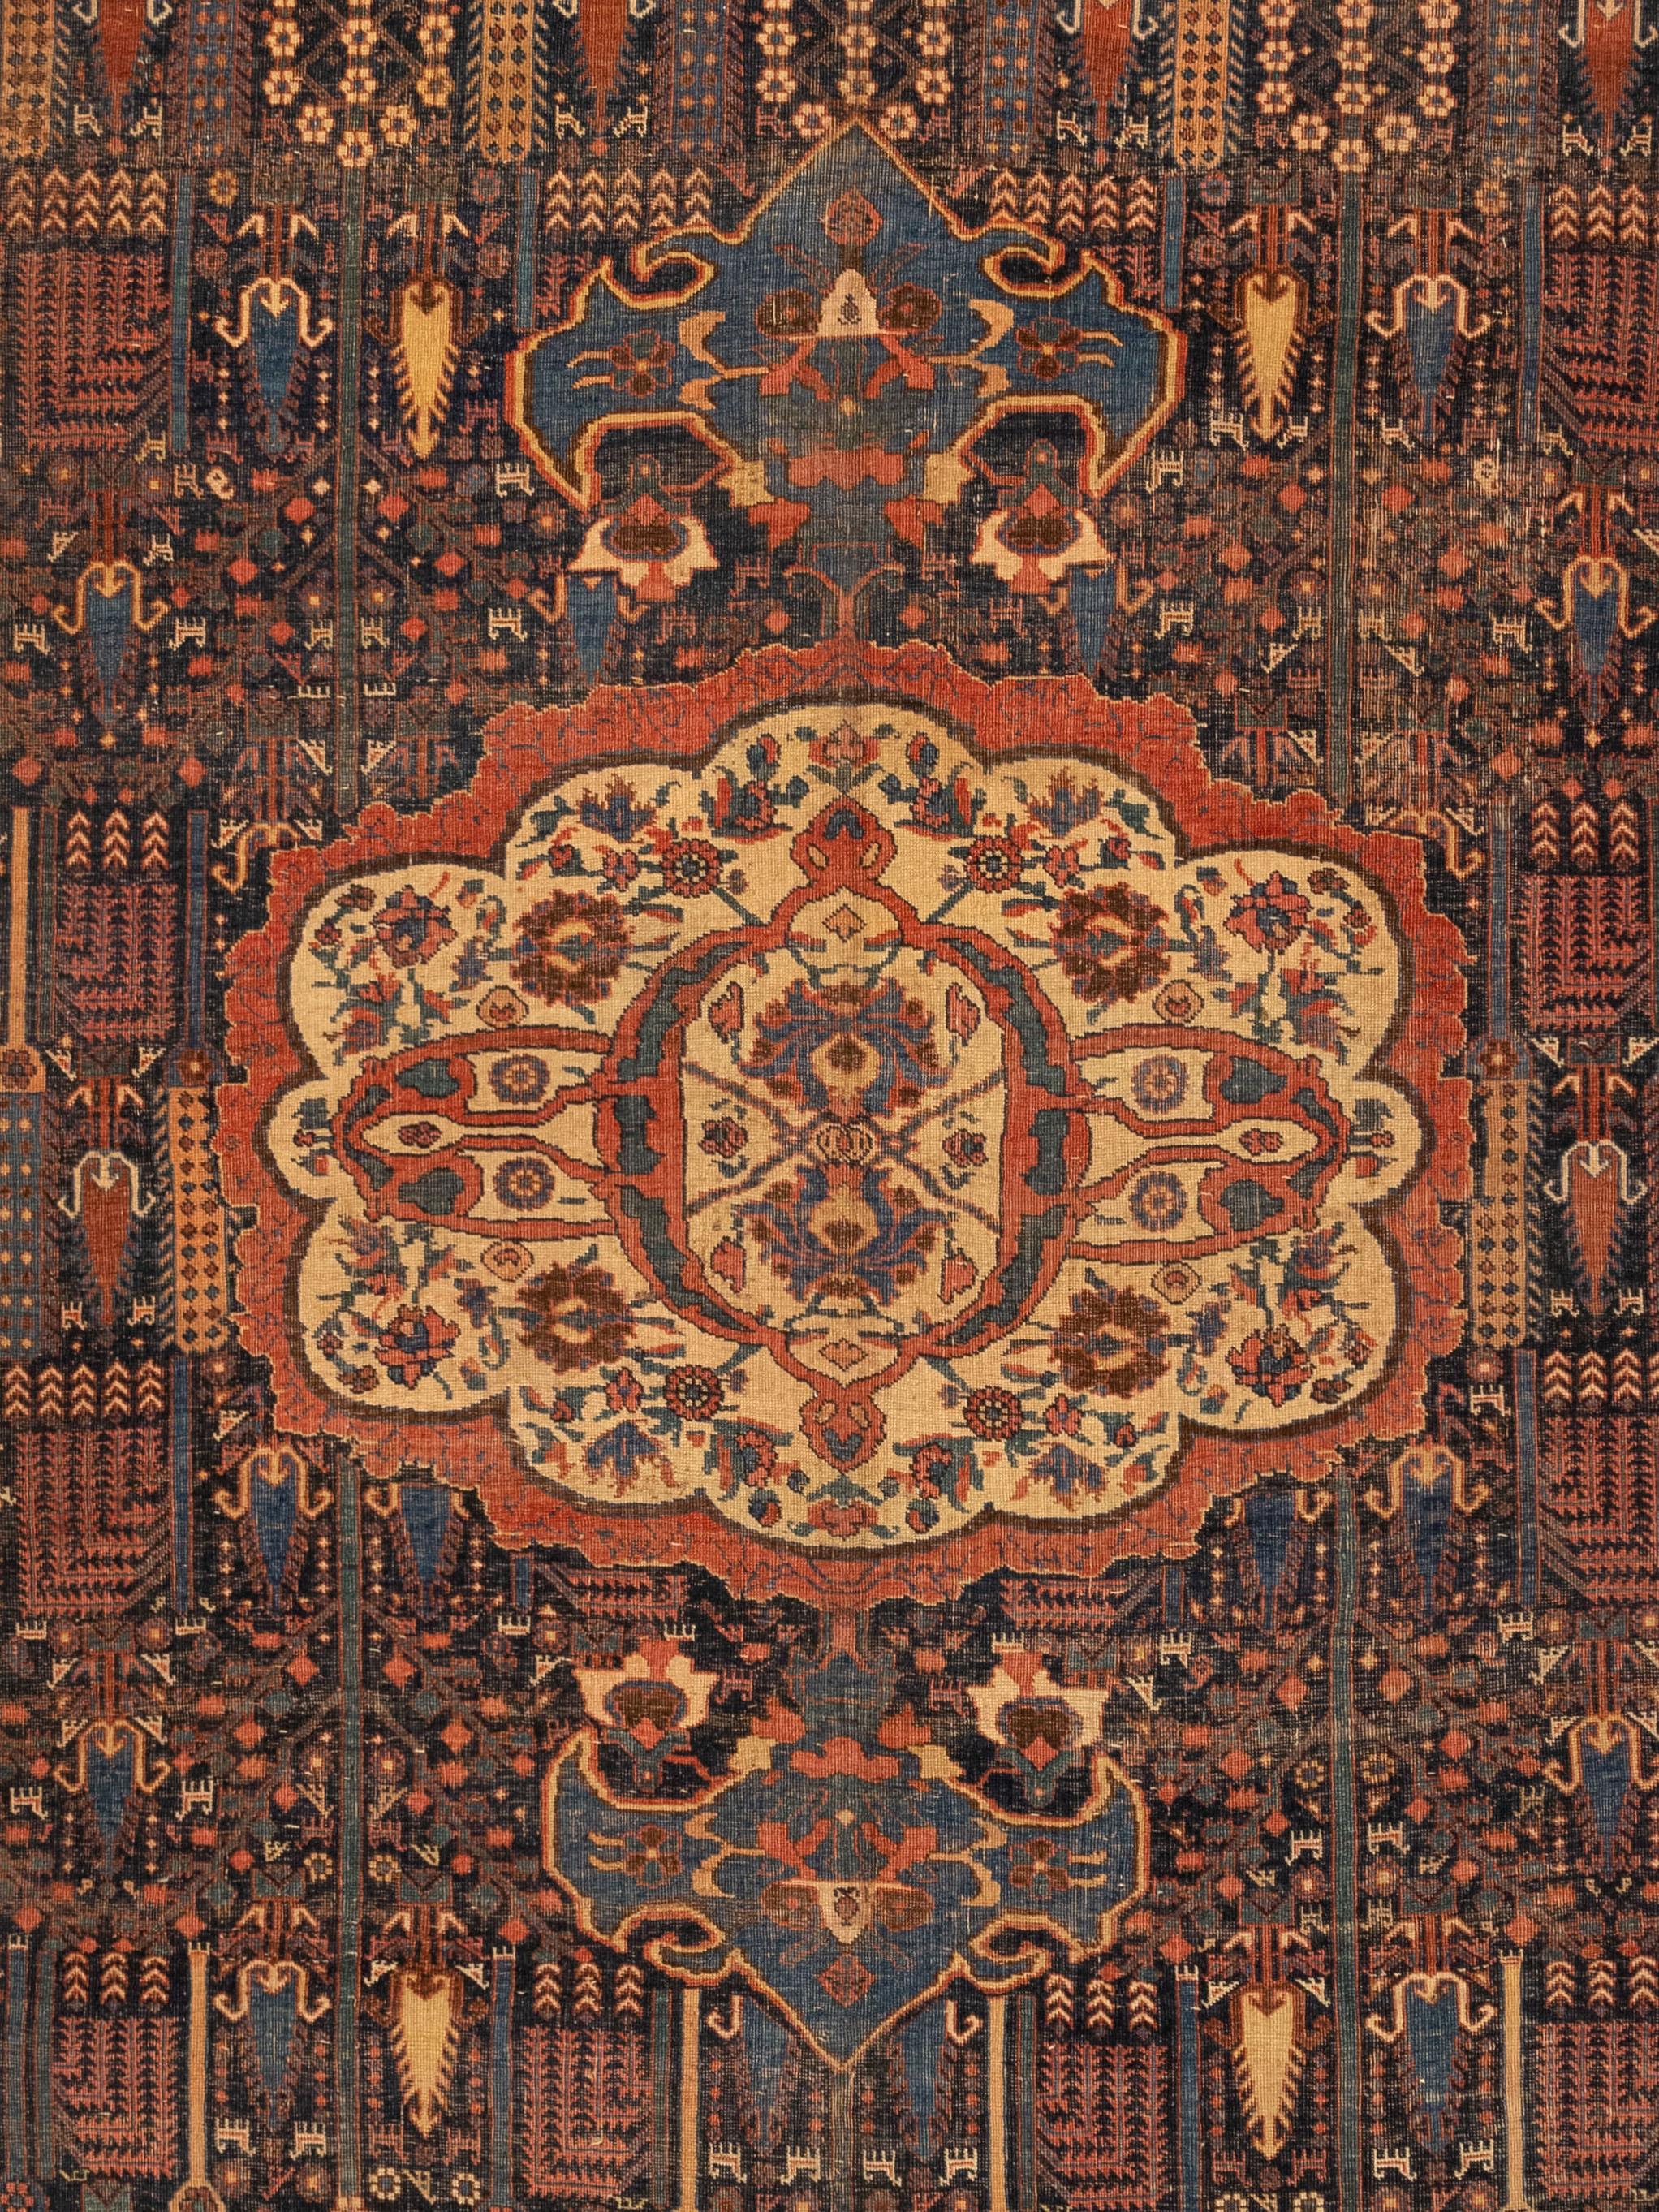 This is an antique Bijar rug. Bijar rugs get their name from a market center in Northwestern Iran by the name of Bijar. This market place has a long standing history of being a major weaving area, producing some of the most finely crafted rugs.